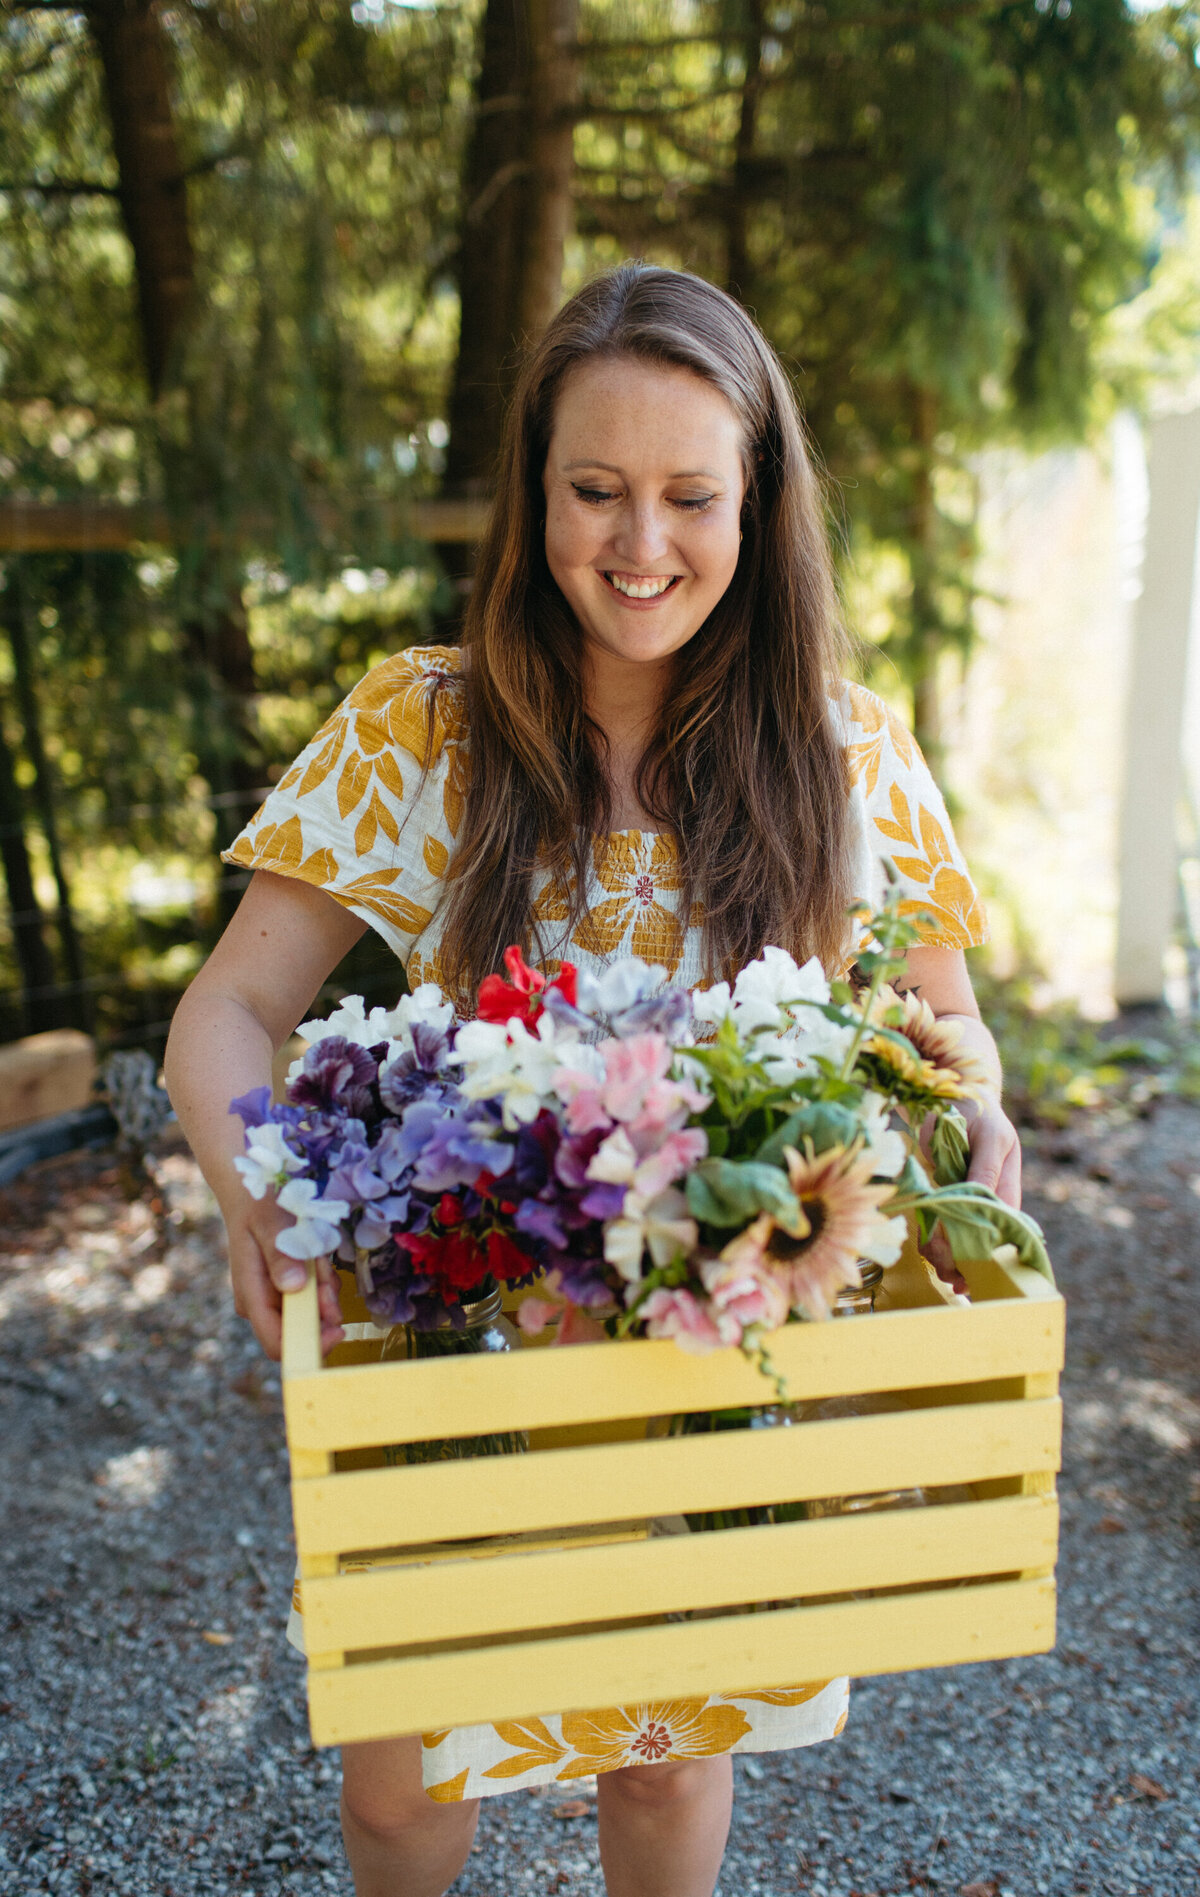 Bobby-dazzler-outdoor-farm-flower-stand-blushing-buttercup-cowichan-valley-torquay-surf-coast-geelong-photographer-4